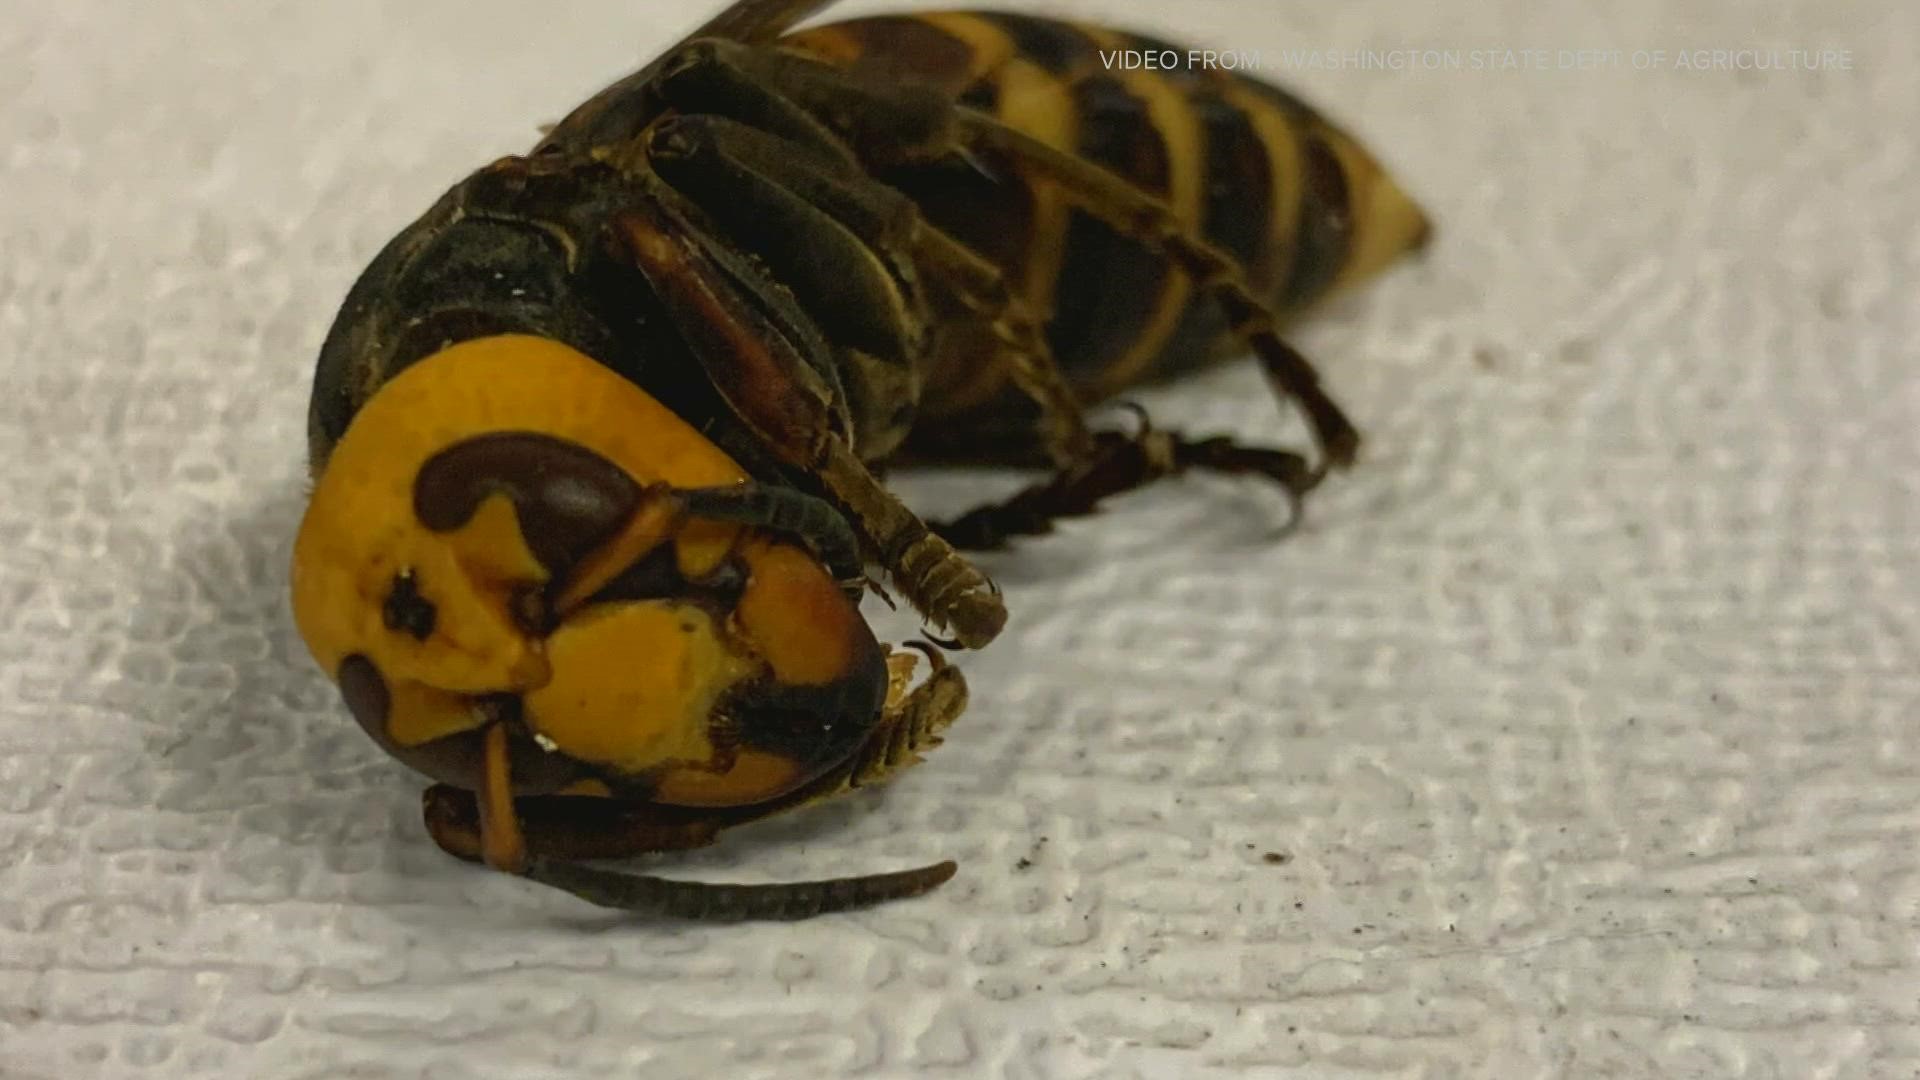 Nearly 1,500 Asian giant hornets in “various stages of development” were found in a nest in Whatcom County. The nest was eradicated on Wednesday.